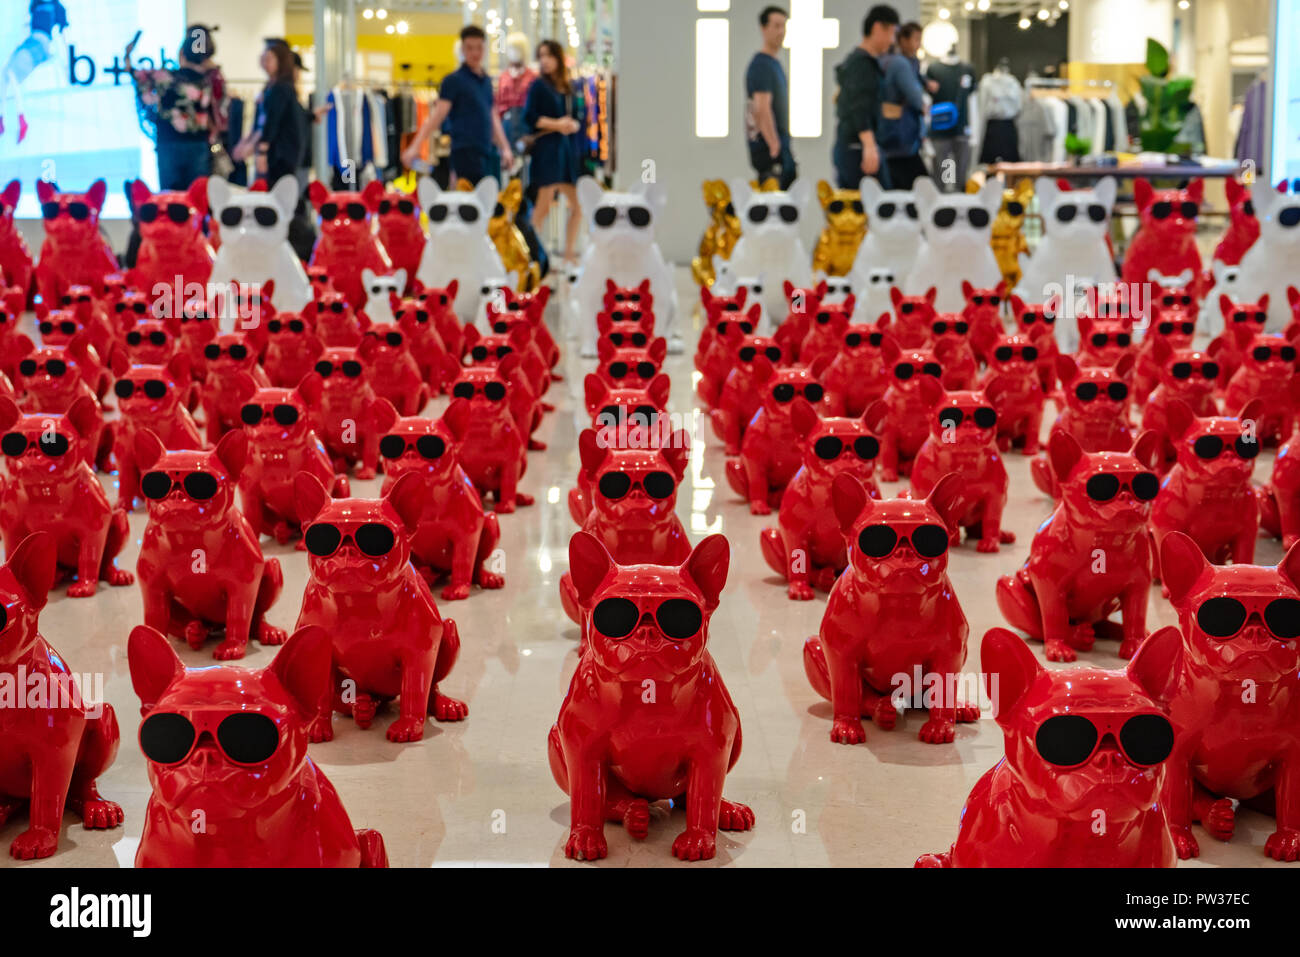 Dogbots (electronic robot dogs) on display for sale at shopping mall in China Stock Photo